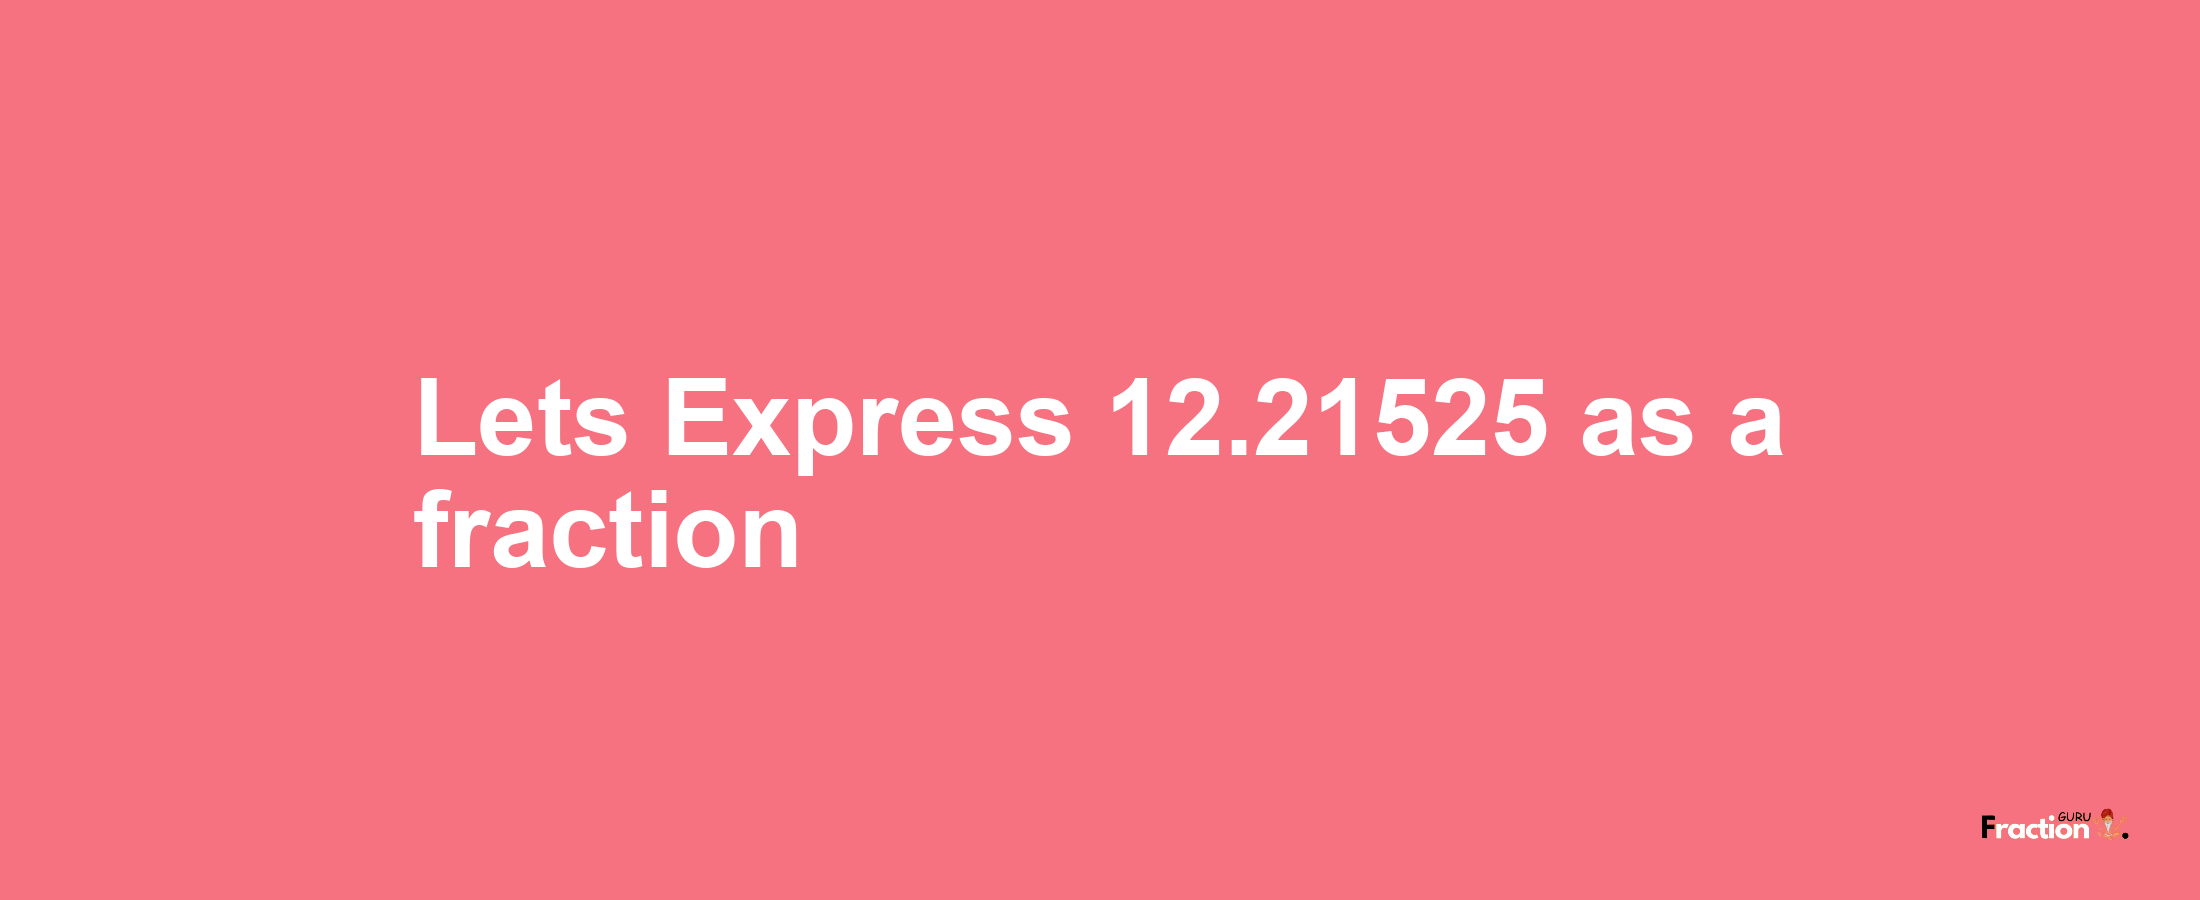 Lets Express 12.21525 as afraction